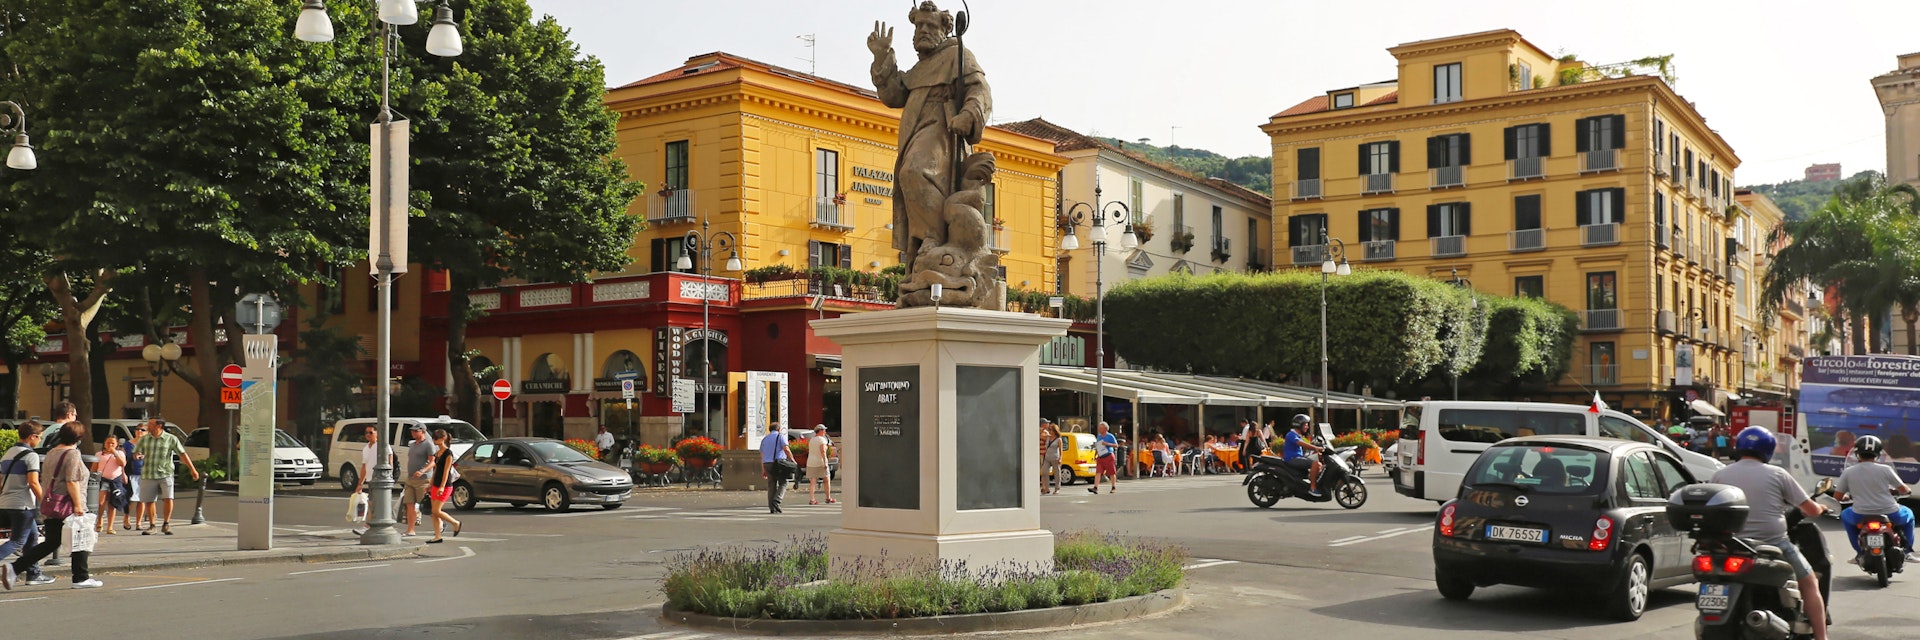 SORRENTO, ITALY - JUNE 24: Piazza Tasso in Sorrento on JUNE 24, 2014. Sant Antonino Abate monument at central place and square in Sorrento, Italy.; Shutterstock ID 238206238; Your name (First / Last): Josh Vogel; GL account no.: 56530; Netsuite department name: Online Design; Full Product or Project name including edition: Digital Content/Sights